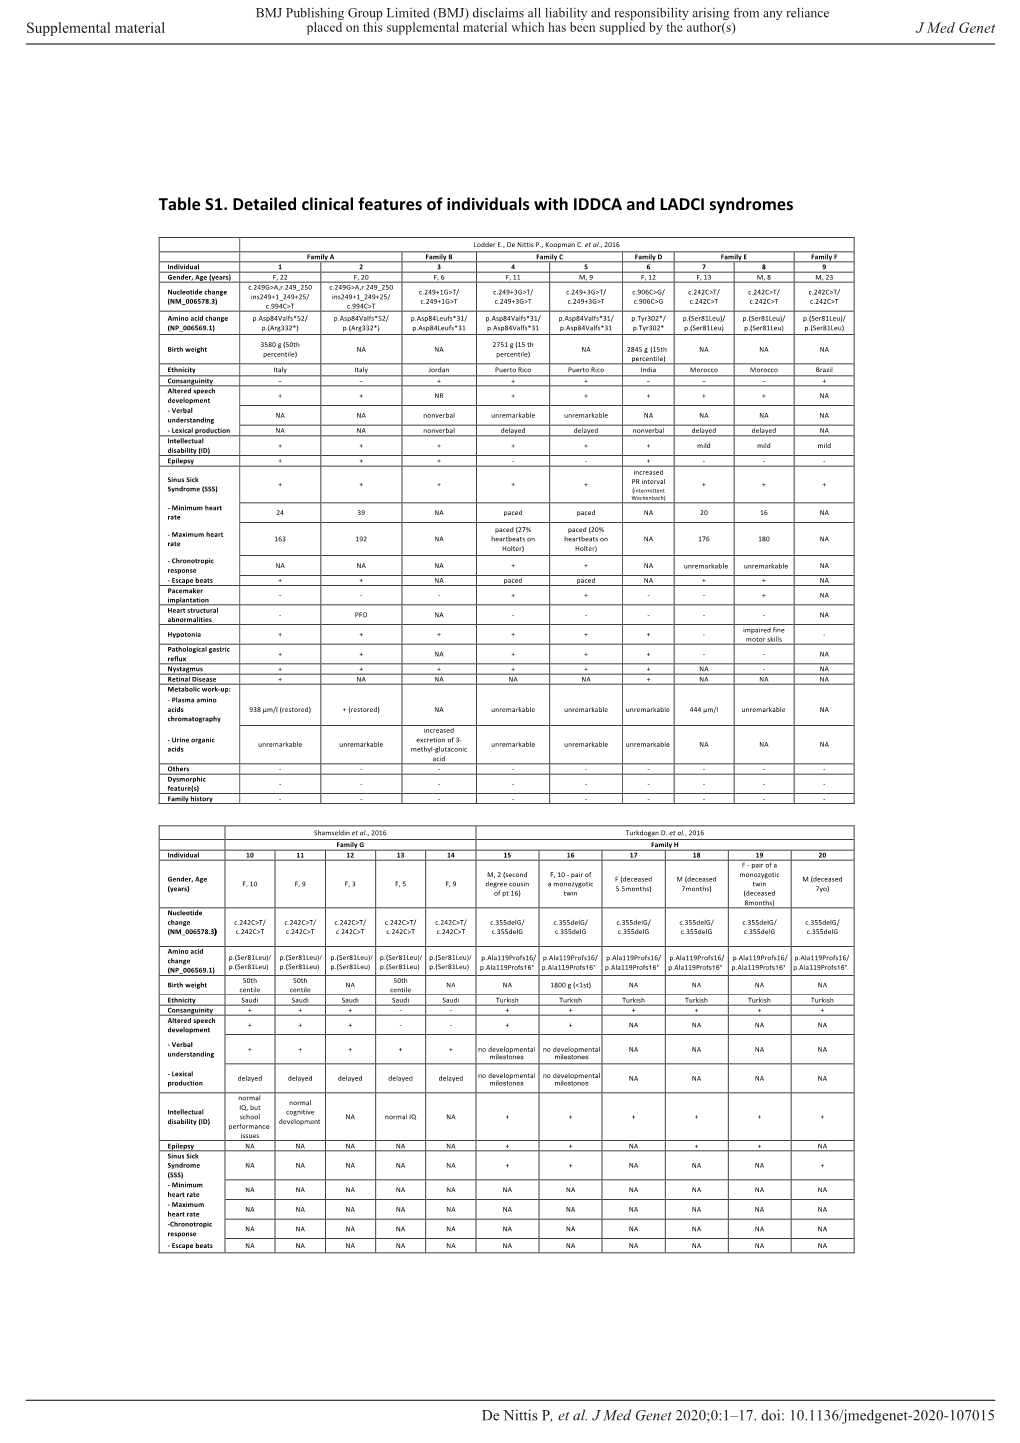 Table S1. Detailed Clinical Features of Individuals with IDDCA and LADCI Syndromes